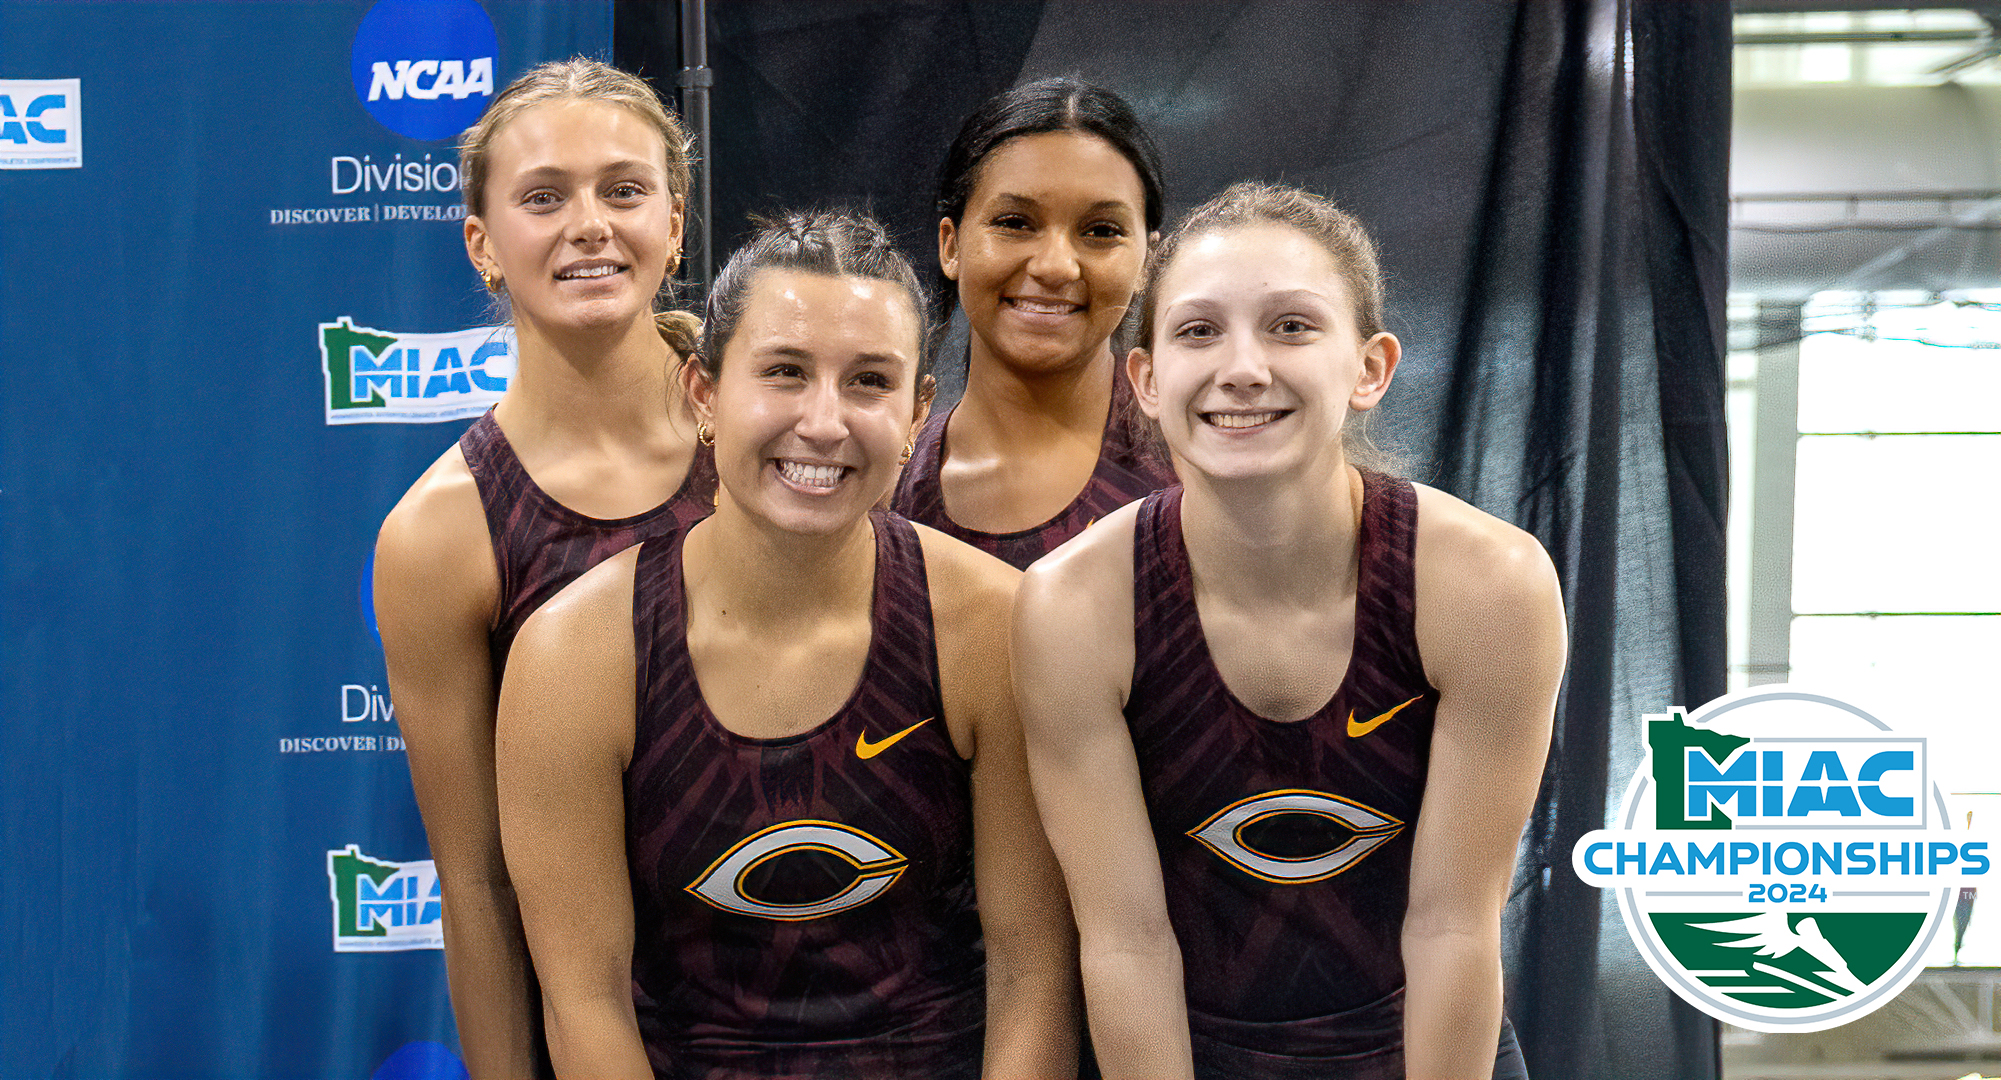 The Cobber crew of (L-R) Kyla Nygaard, Andie Sandman, Piper Osborne and Emily Rengo broke the school record in the 4x200-meter relay.